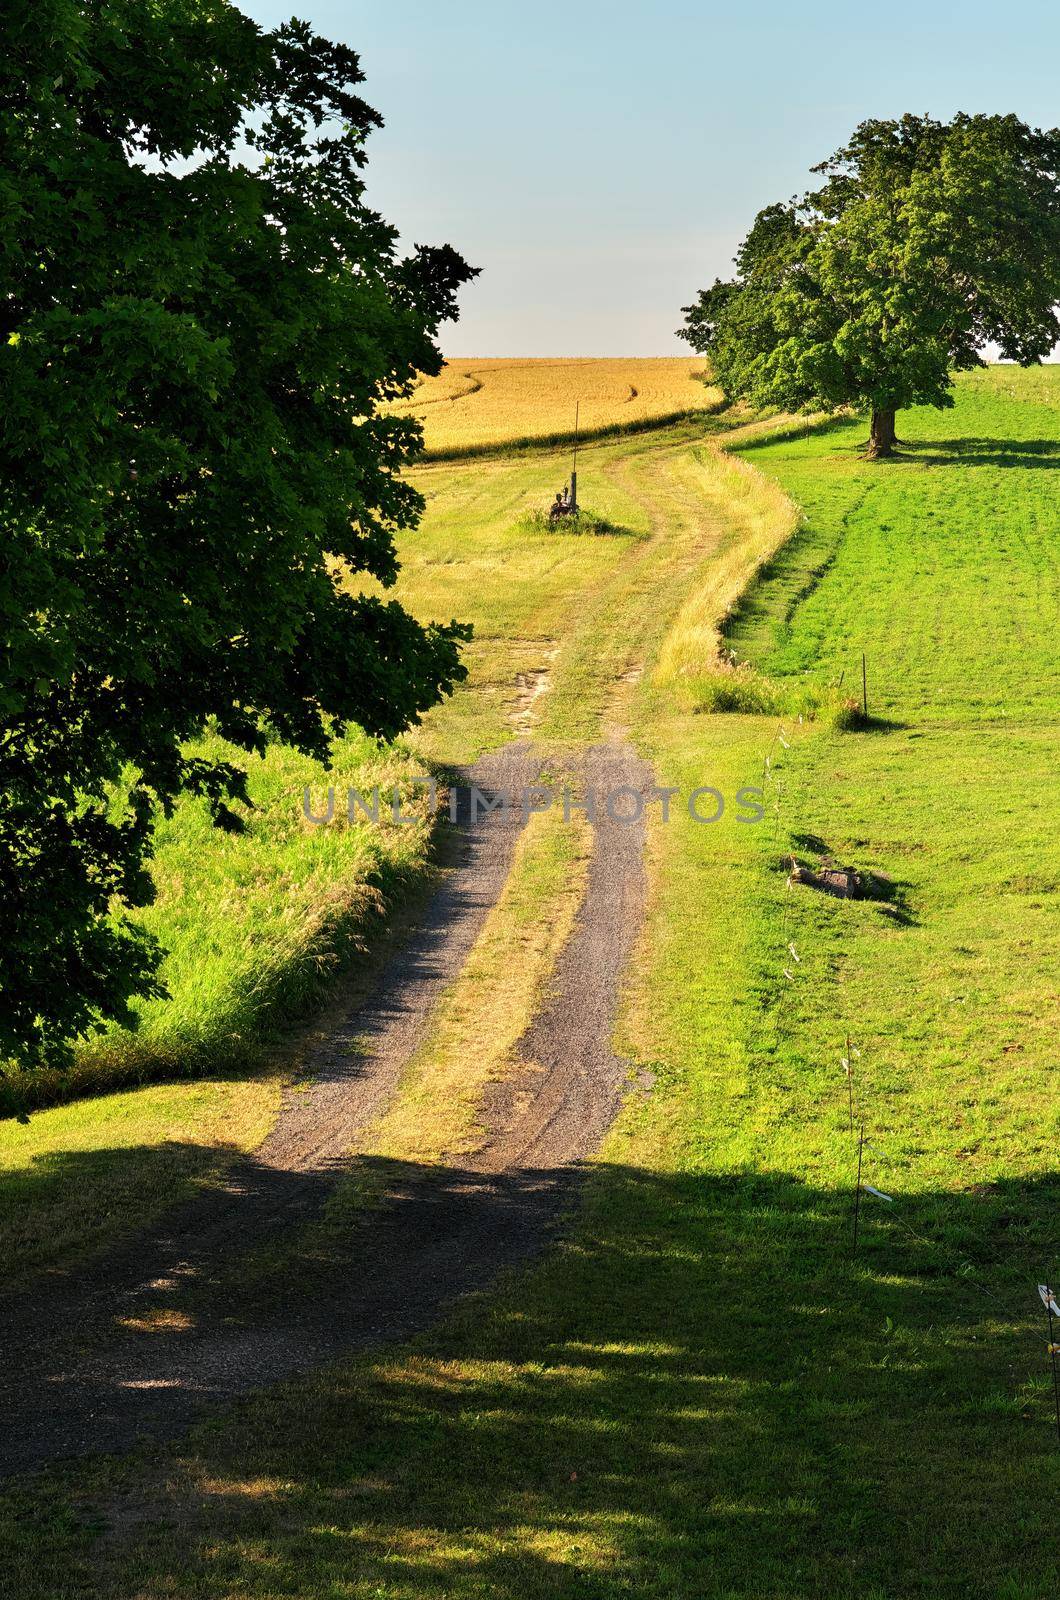 Idyllic Summer Scene with a Dirt Road Running Through Green Pastures Lined with Giant Maple Trees by markvandam